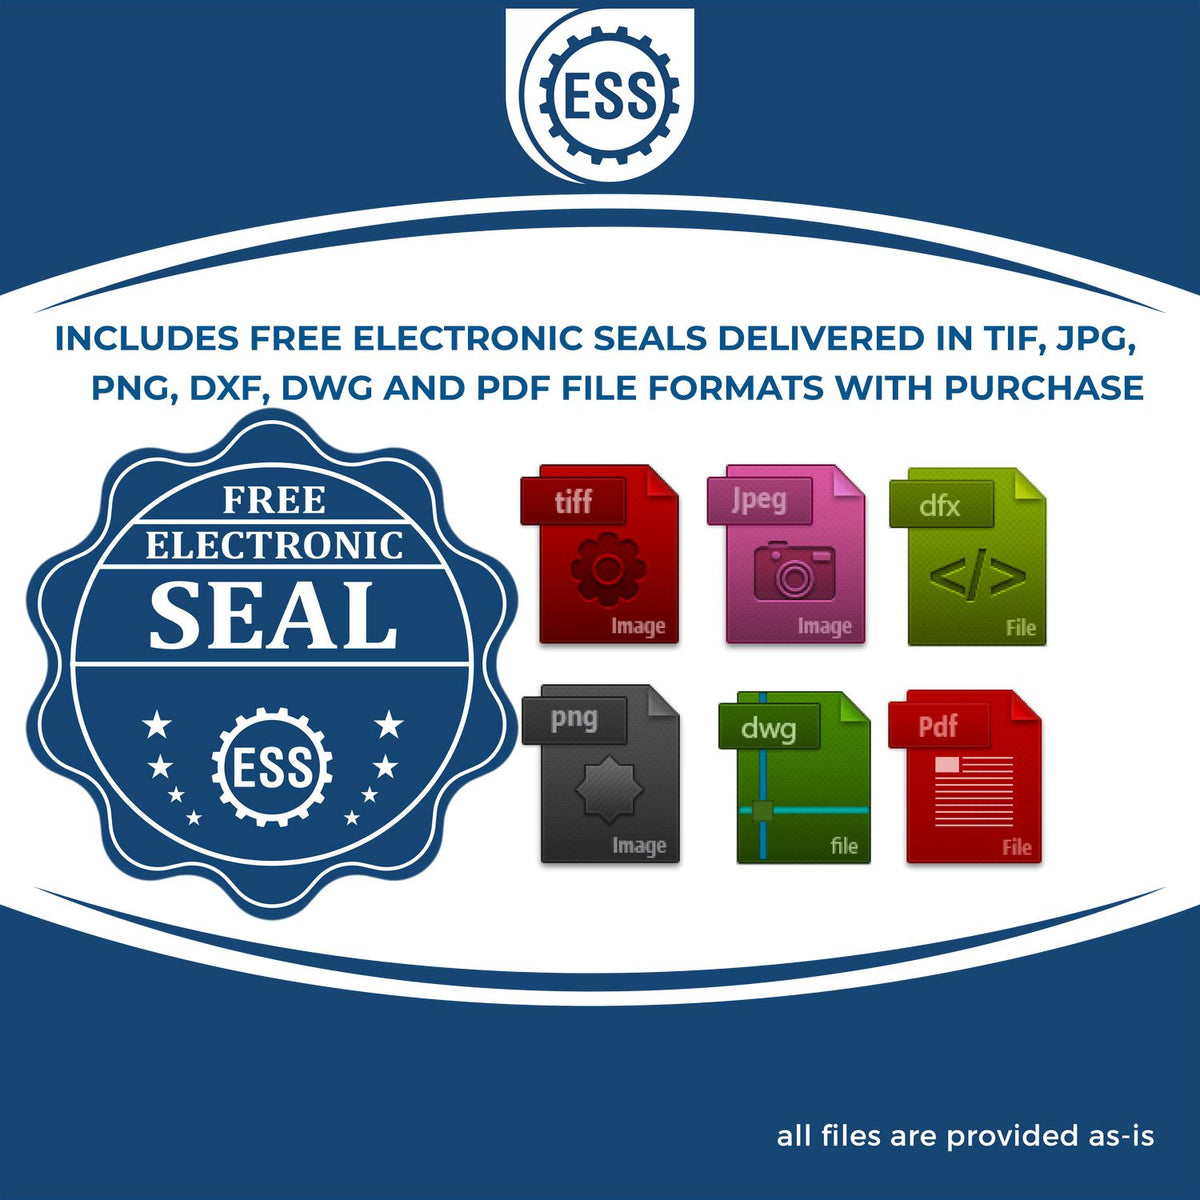 An infographic for the free electronic seal for the Slim Pre-Inked Arkansas Land Surveyor Seal Stamp illustrating the different file type icons such as DXF, DWG, TIF, JPG and PNG.